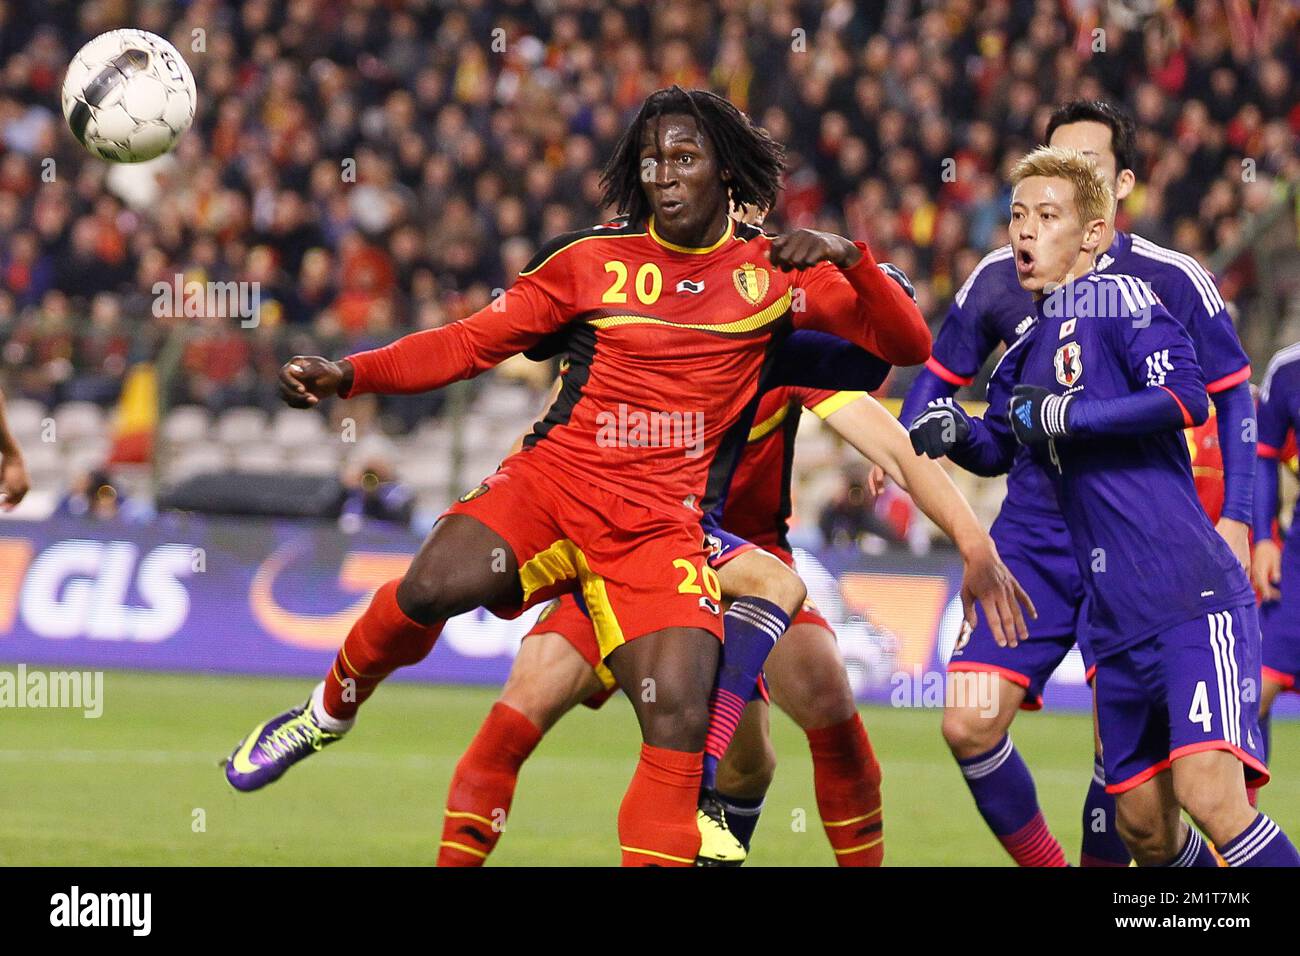 Belgium's Romelu Lukaku and Japan's Keisuke Honda fight for the ball during the friendly match between Belgian national soccer team Red Devils and Japan, on Tuesday 19 November 2013, in Brussels. BELGA PHOTO BRUNO FAHY Stock Photo